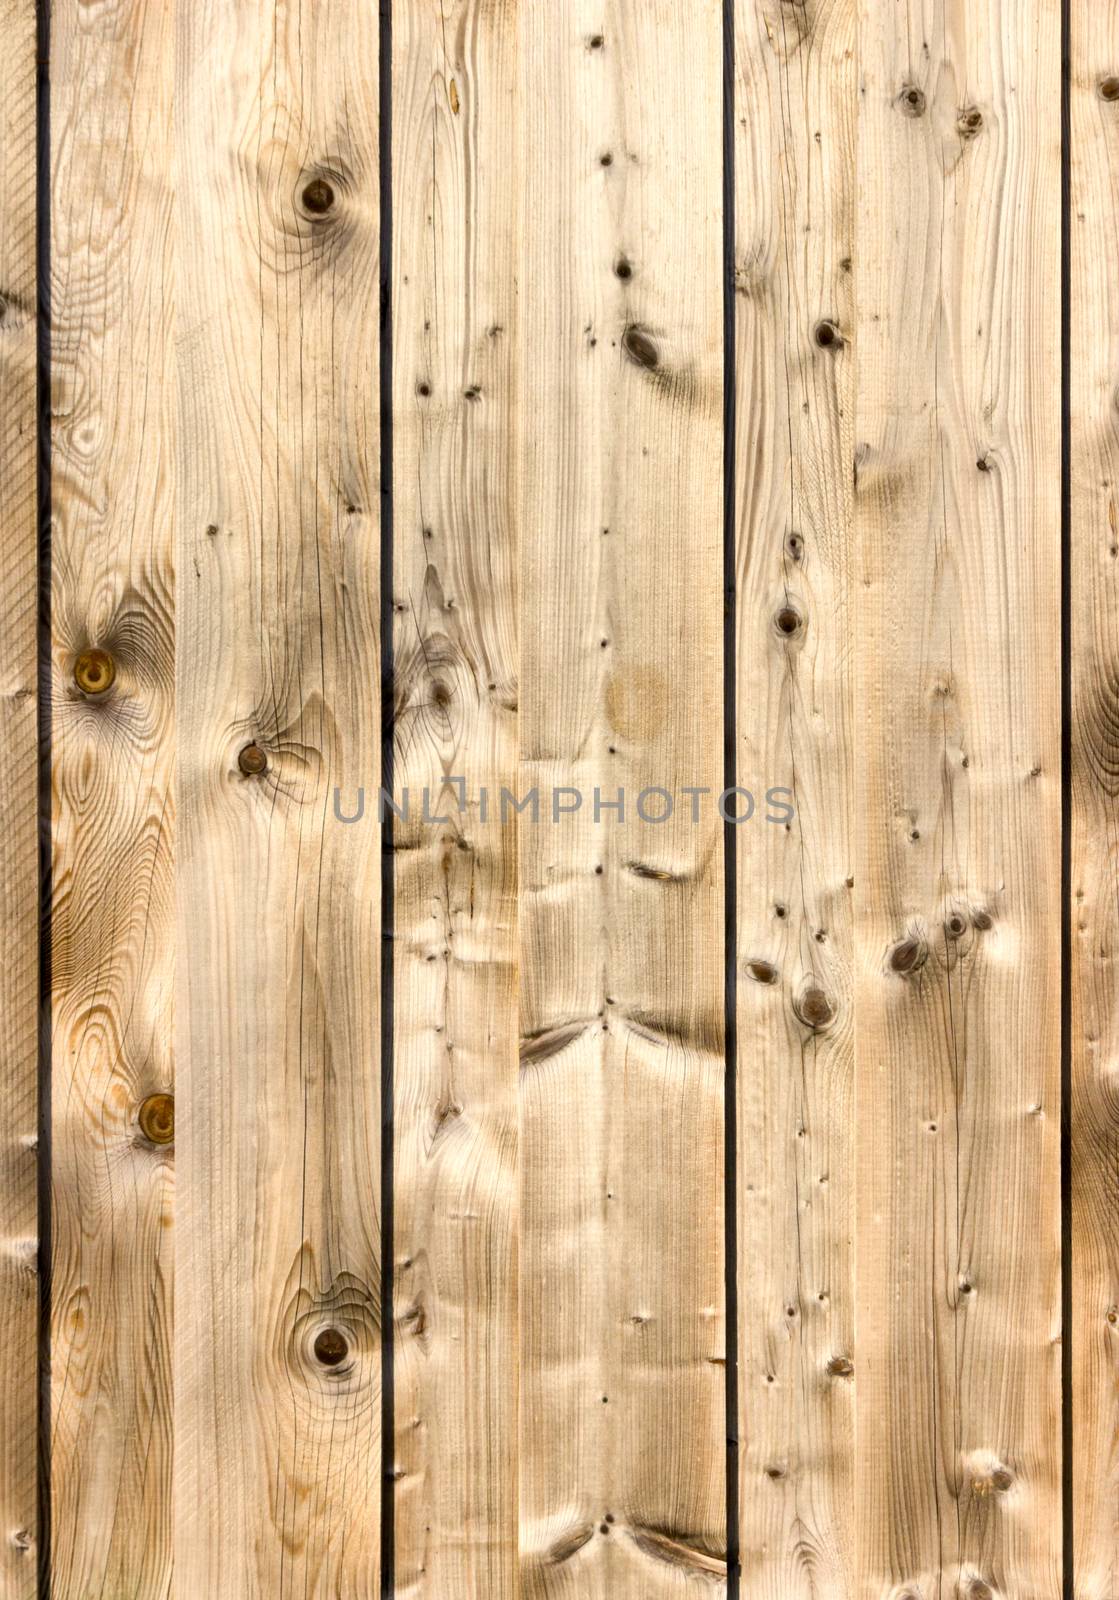 Rustic wooden boards by BenSchonewille